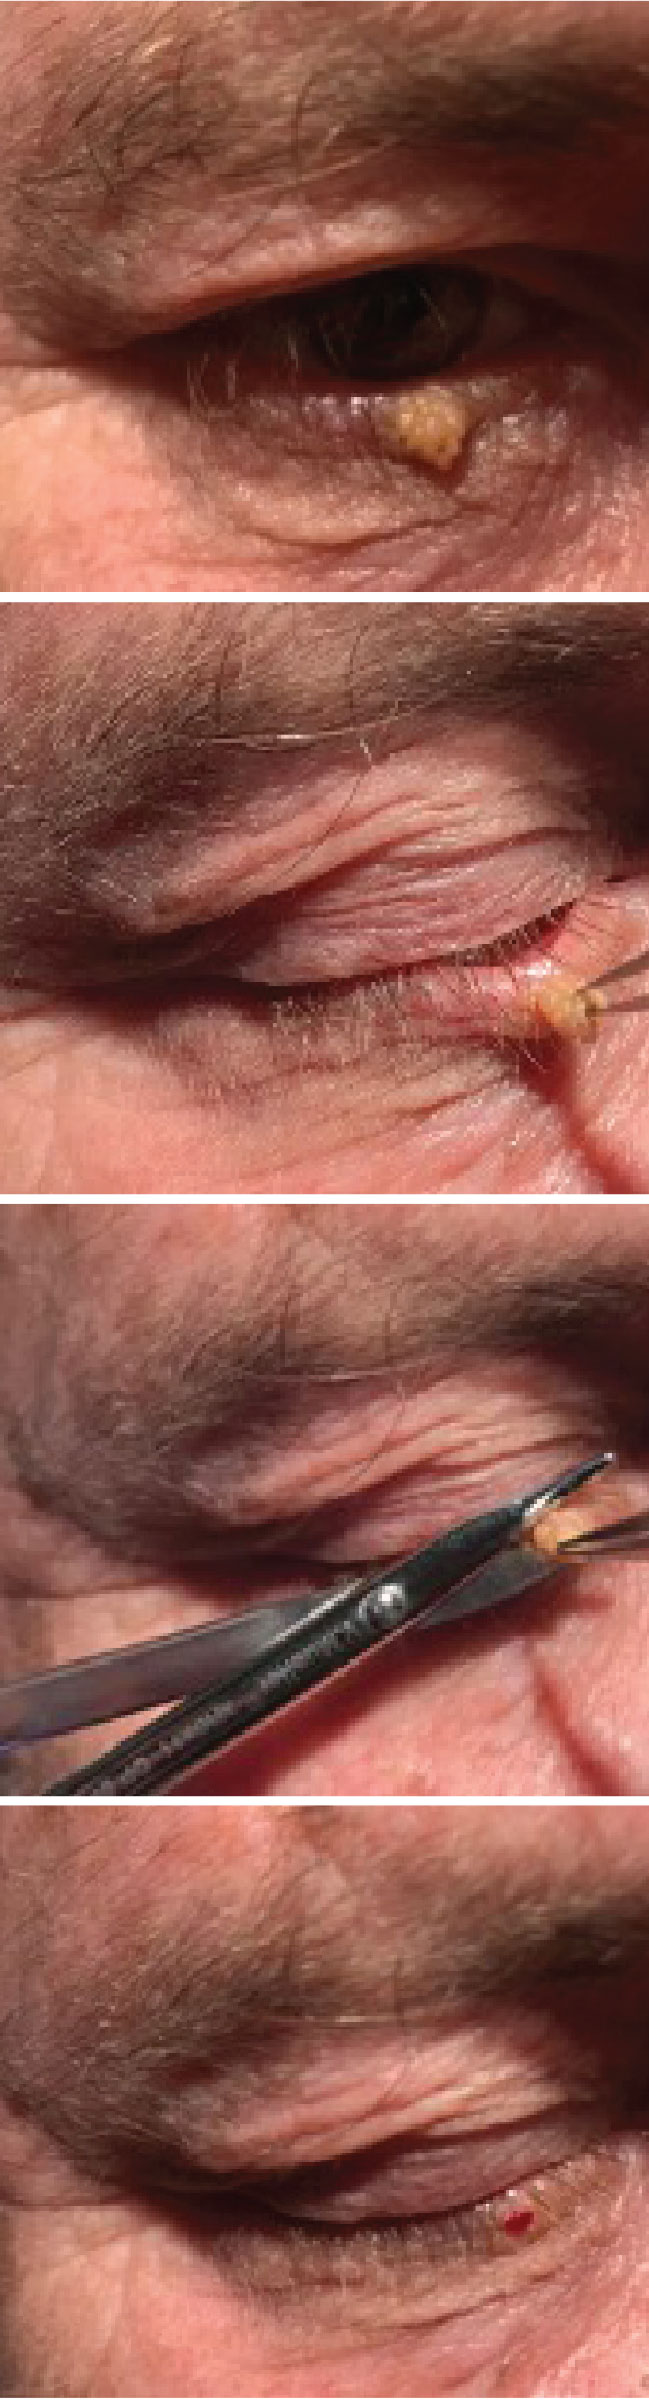 A small papilloma is removed from the lower right eyelid. The forceps are used to pull the lesion taut to provide a clear sight to the base of the lesion. The Wescott scissors are used to cut the lesion at the base. Once the lesion is removed, the patient is left with a flat, smooth surface. 